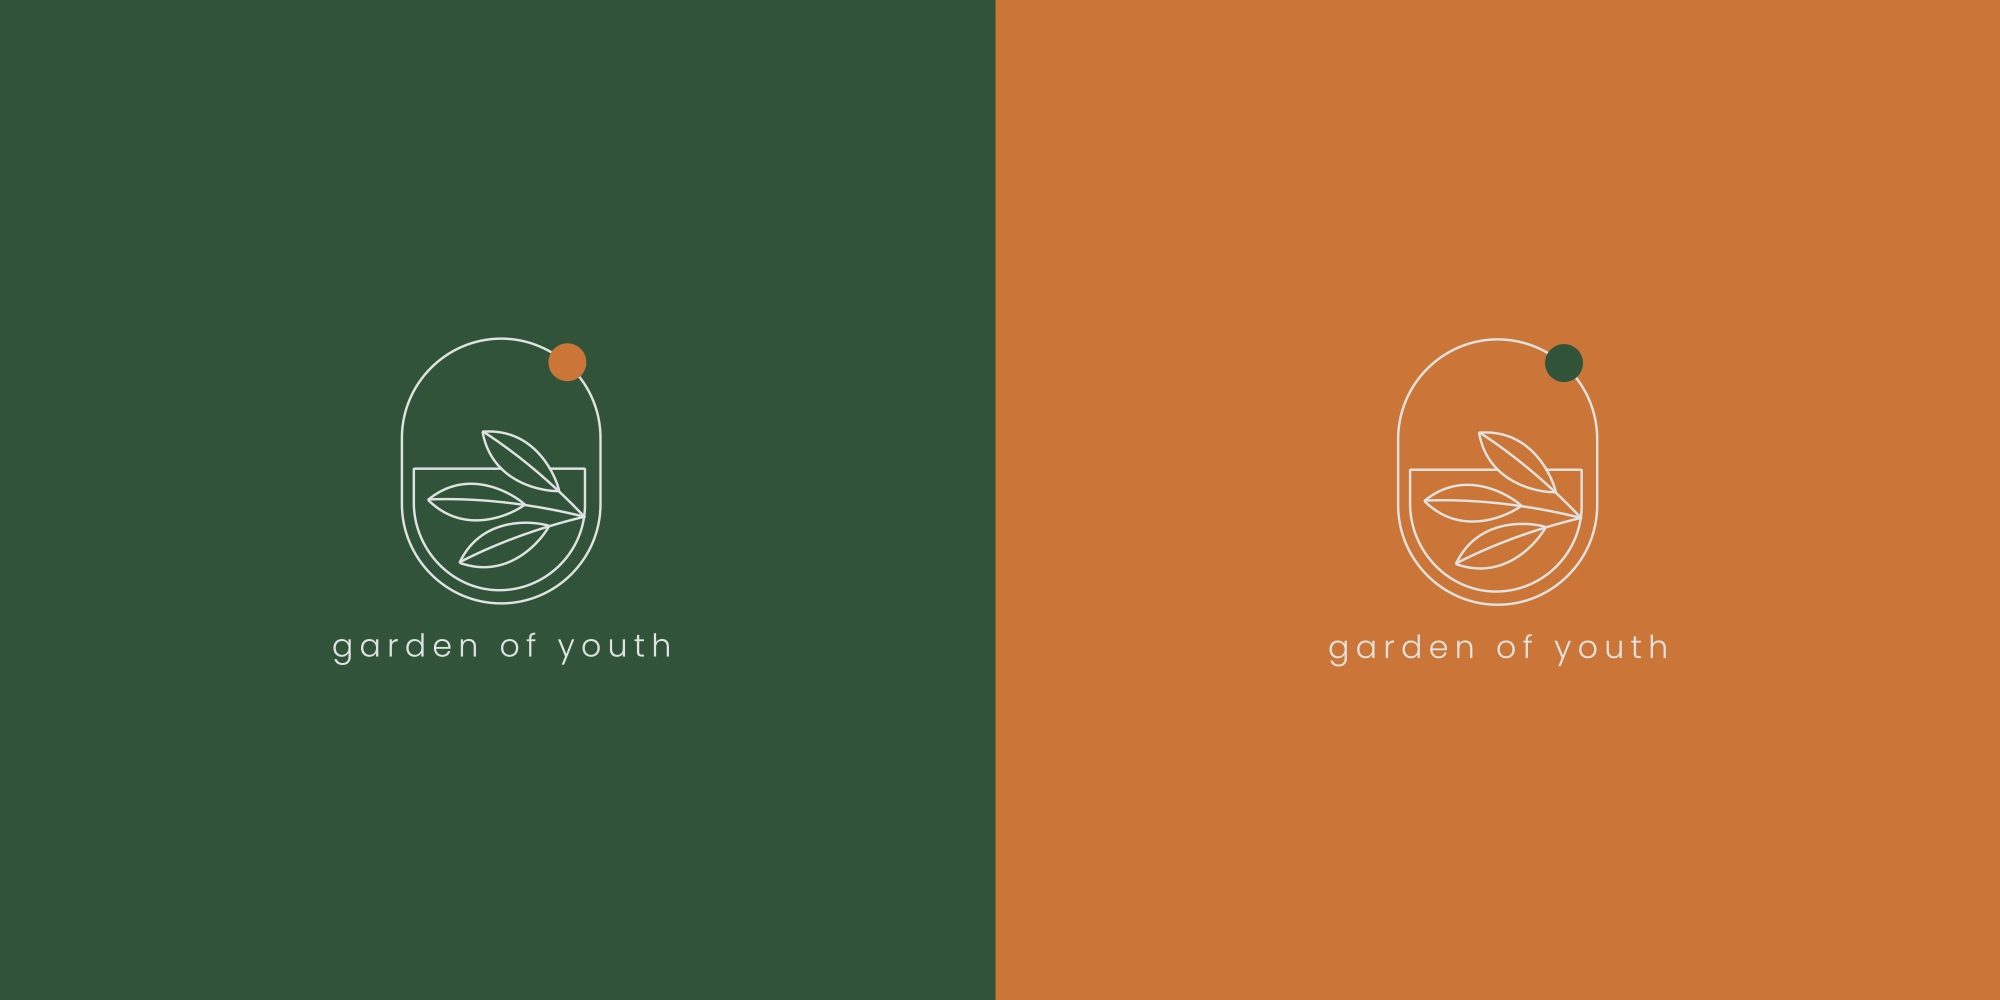 Garden of youth, logo design - Color combination. Created by Milena Stanisavljevic, Web and Graphic Designer at miletart.com